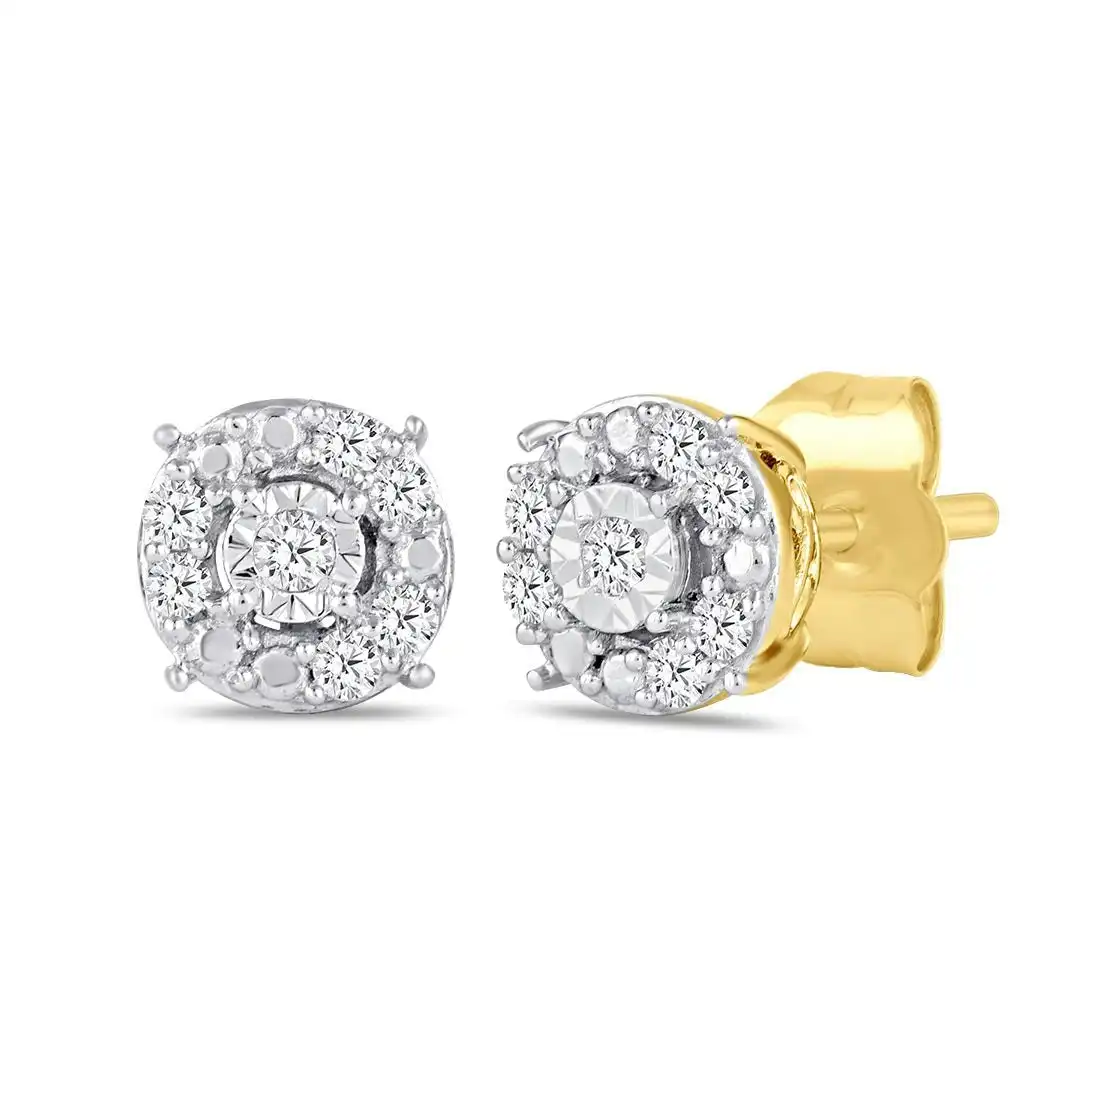 Tia Miracle Halo Earrings with 0.10ct of Diamonds in 9ct Yellow Gold